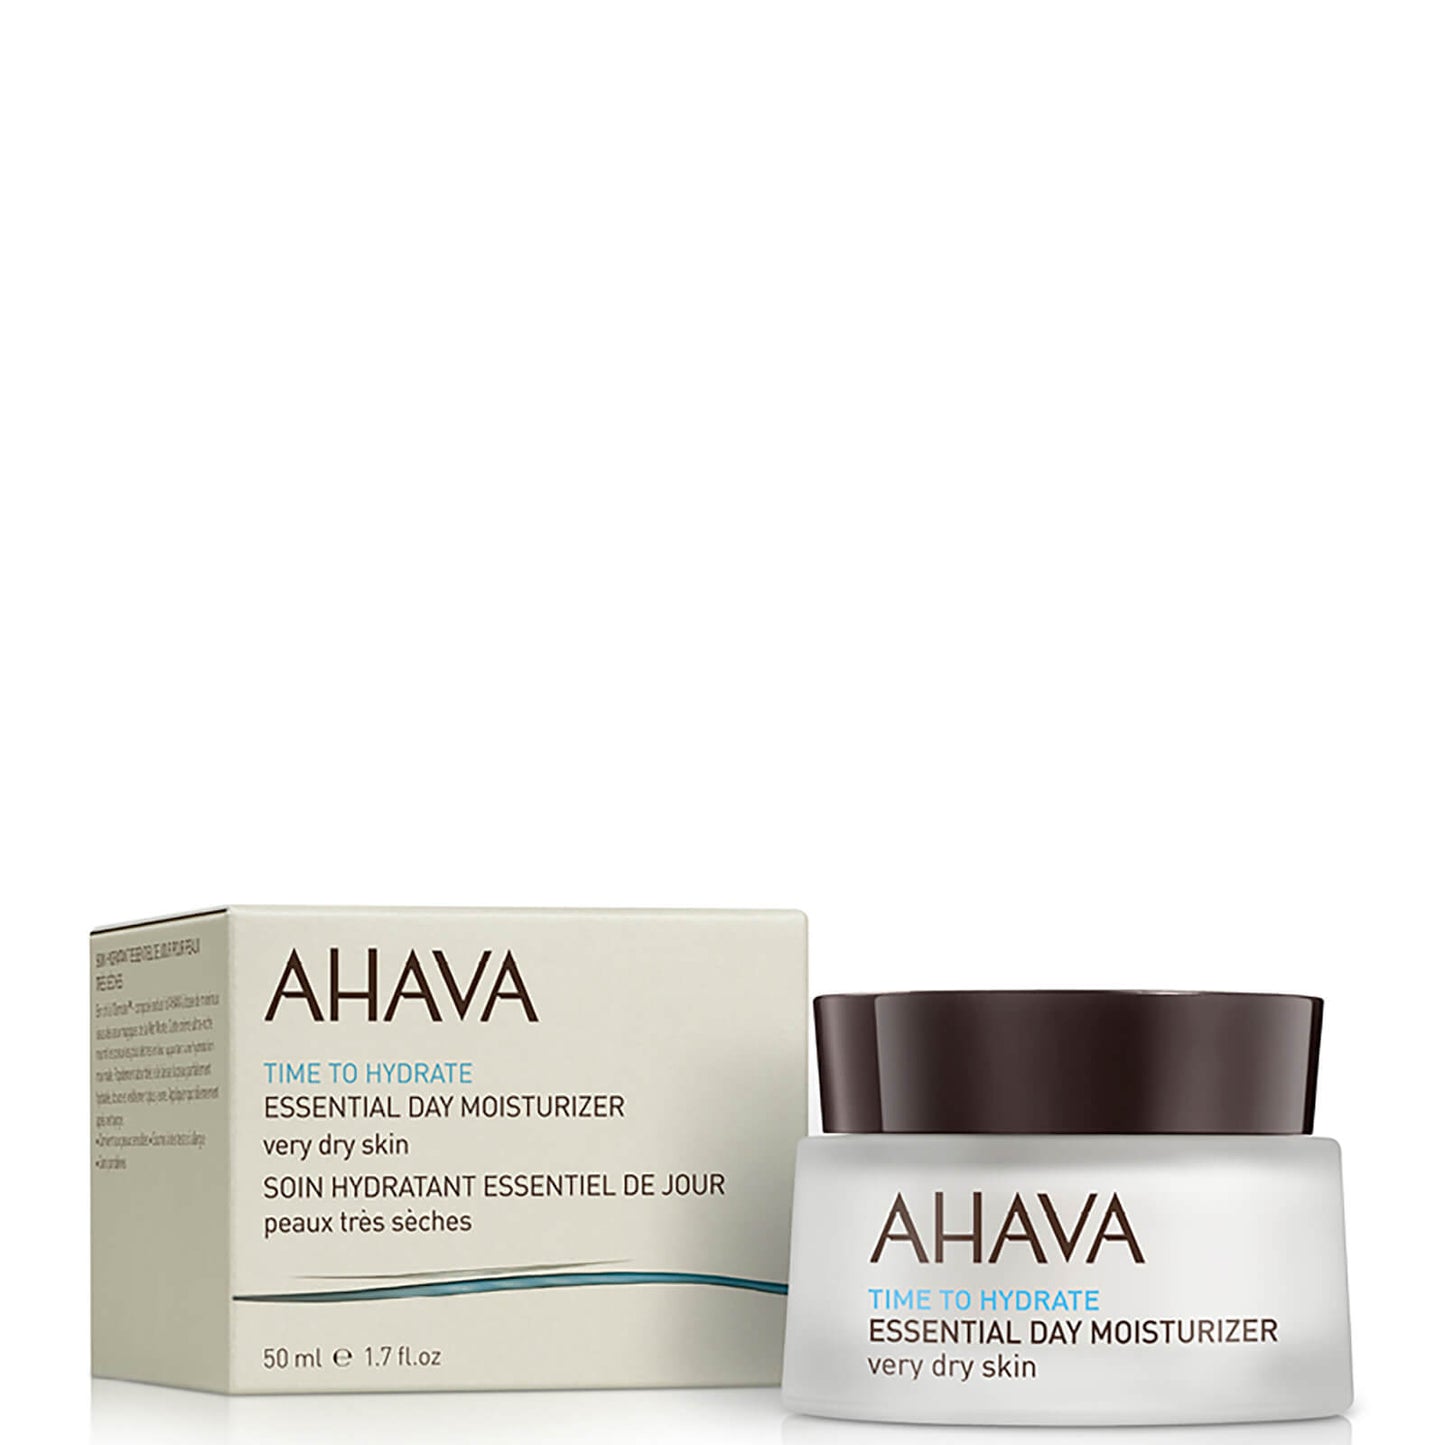 Ahava Time To Hydrate Essential Day Moisturizer